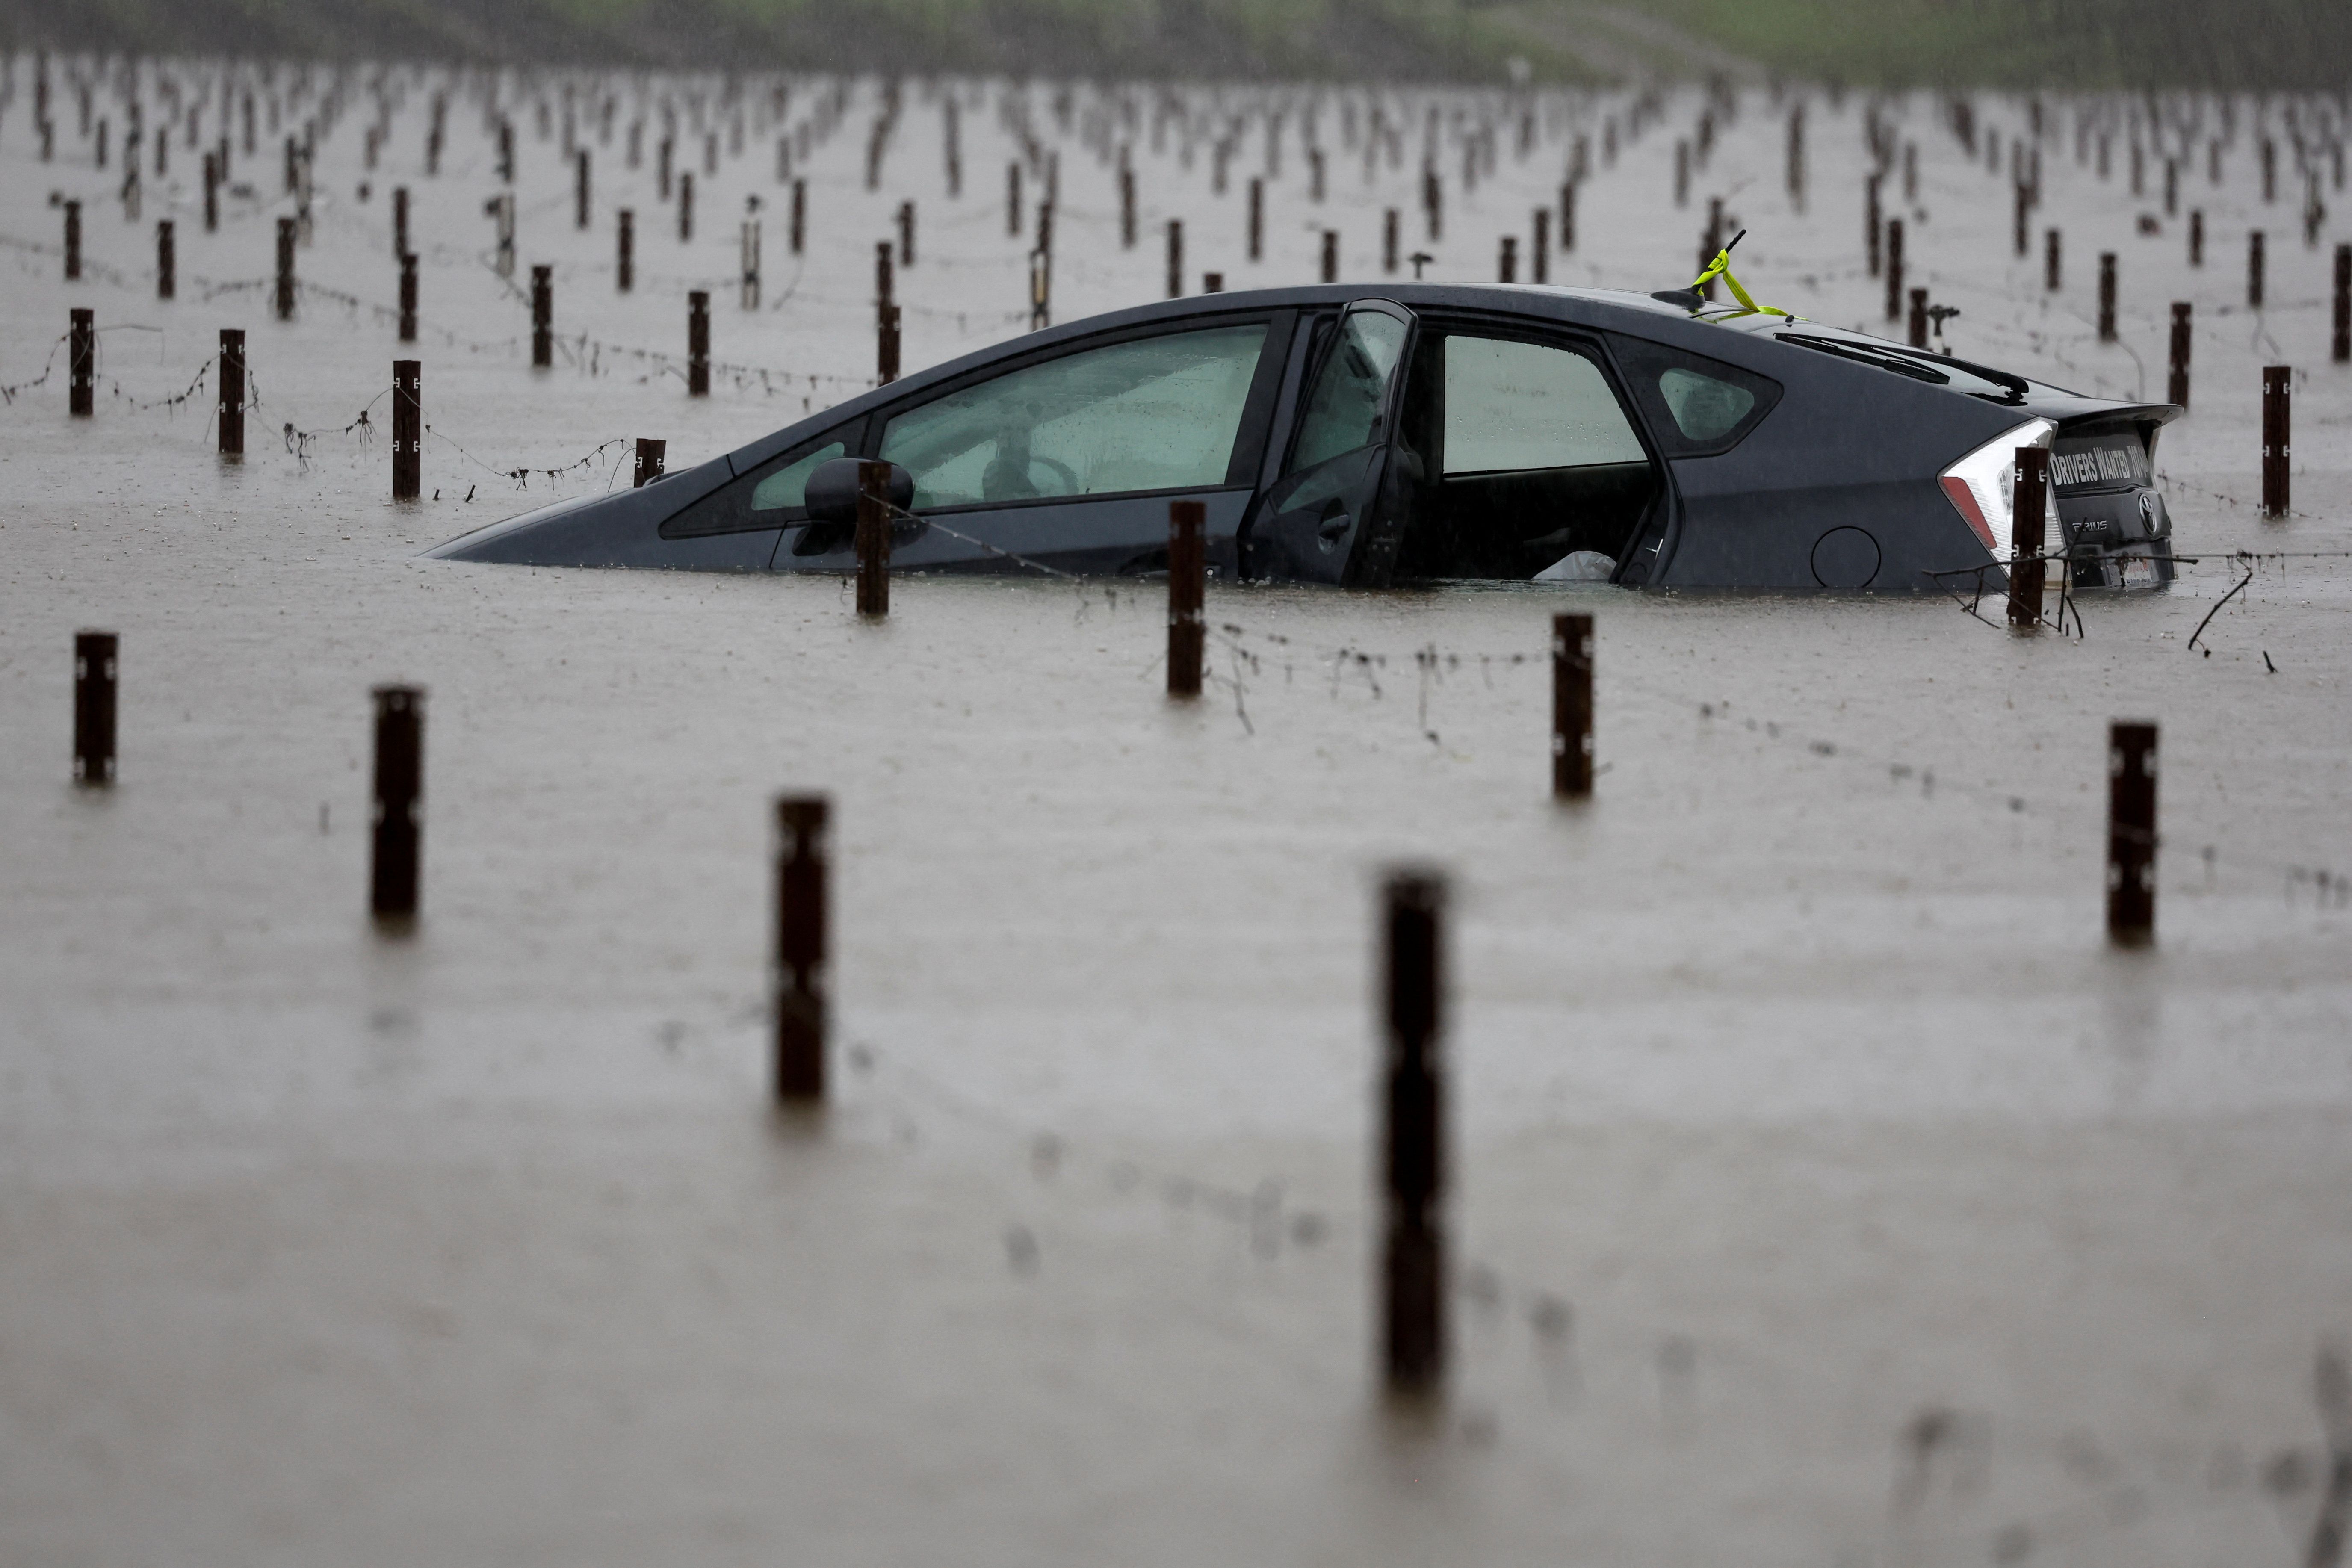 A submerged car is seen in flood waters near a vineyard in Forestville, California, USA.